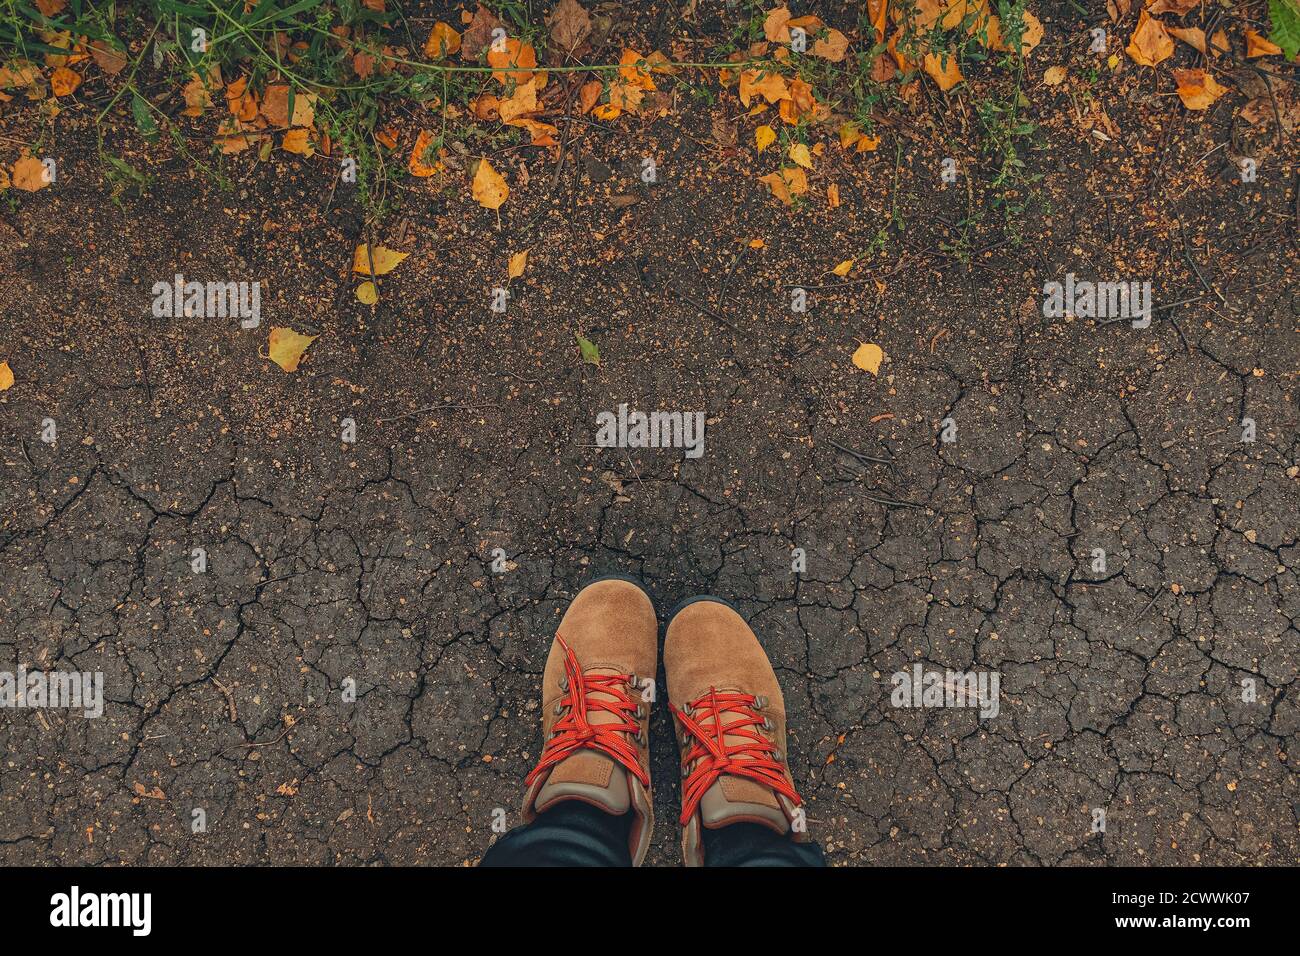 Casual unisex boots with bright laces and colorful autumn fallen leaves. Autumn fall scene. Conceptual image of legs in boots on dry earth and autumn leaves. Lifestyle Fashion trendy style. Top view. Copy space. Stock Photo